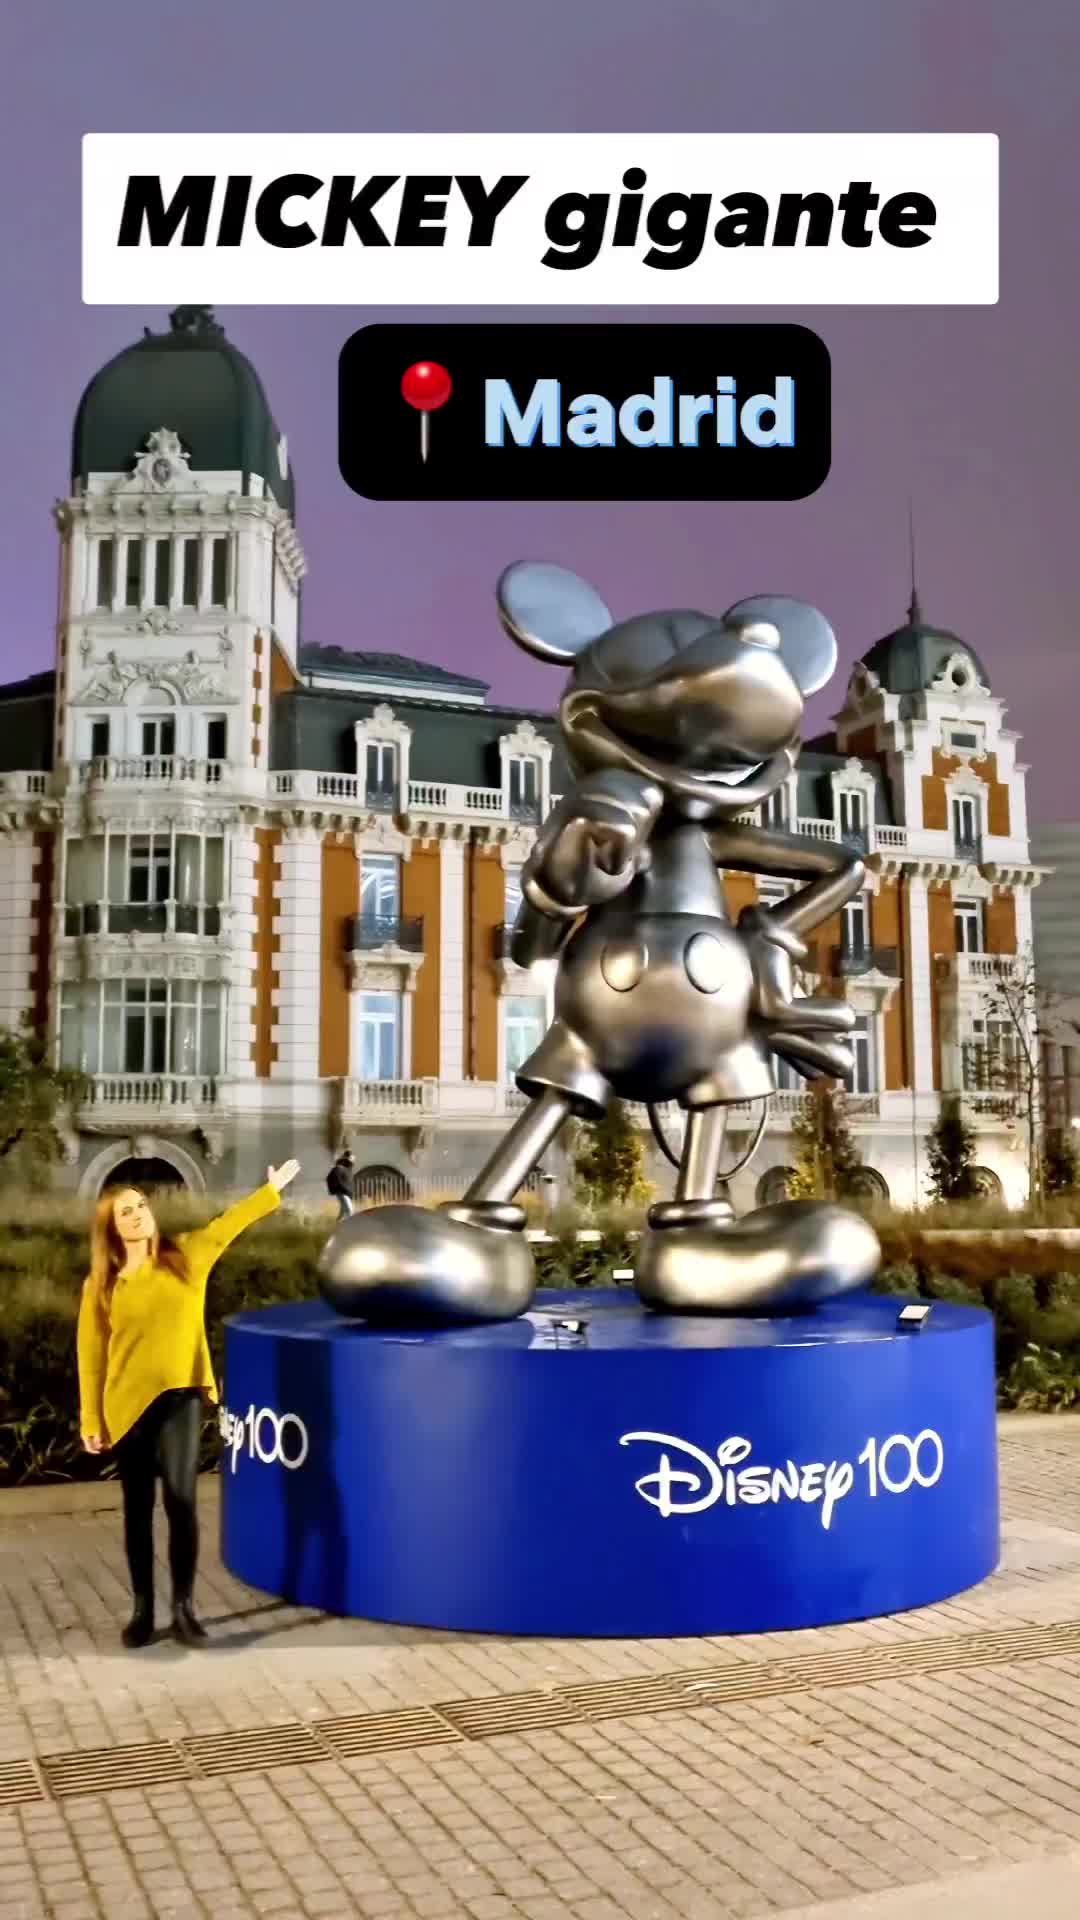 Discover the Giant Mickey in Madrid - Free Event!